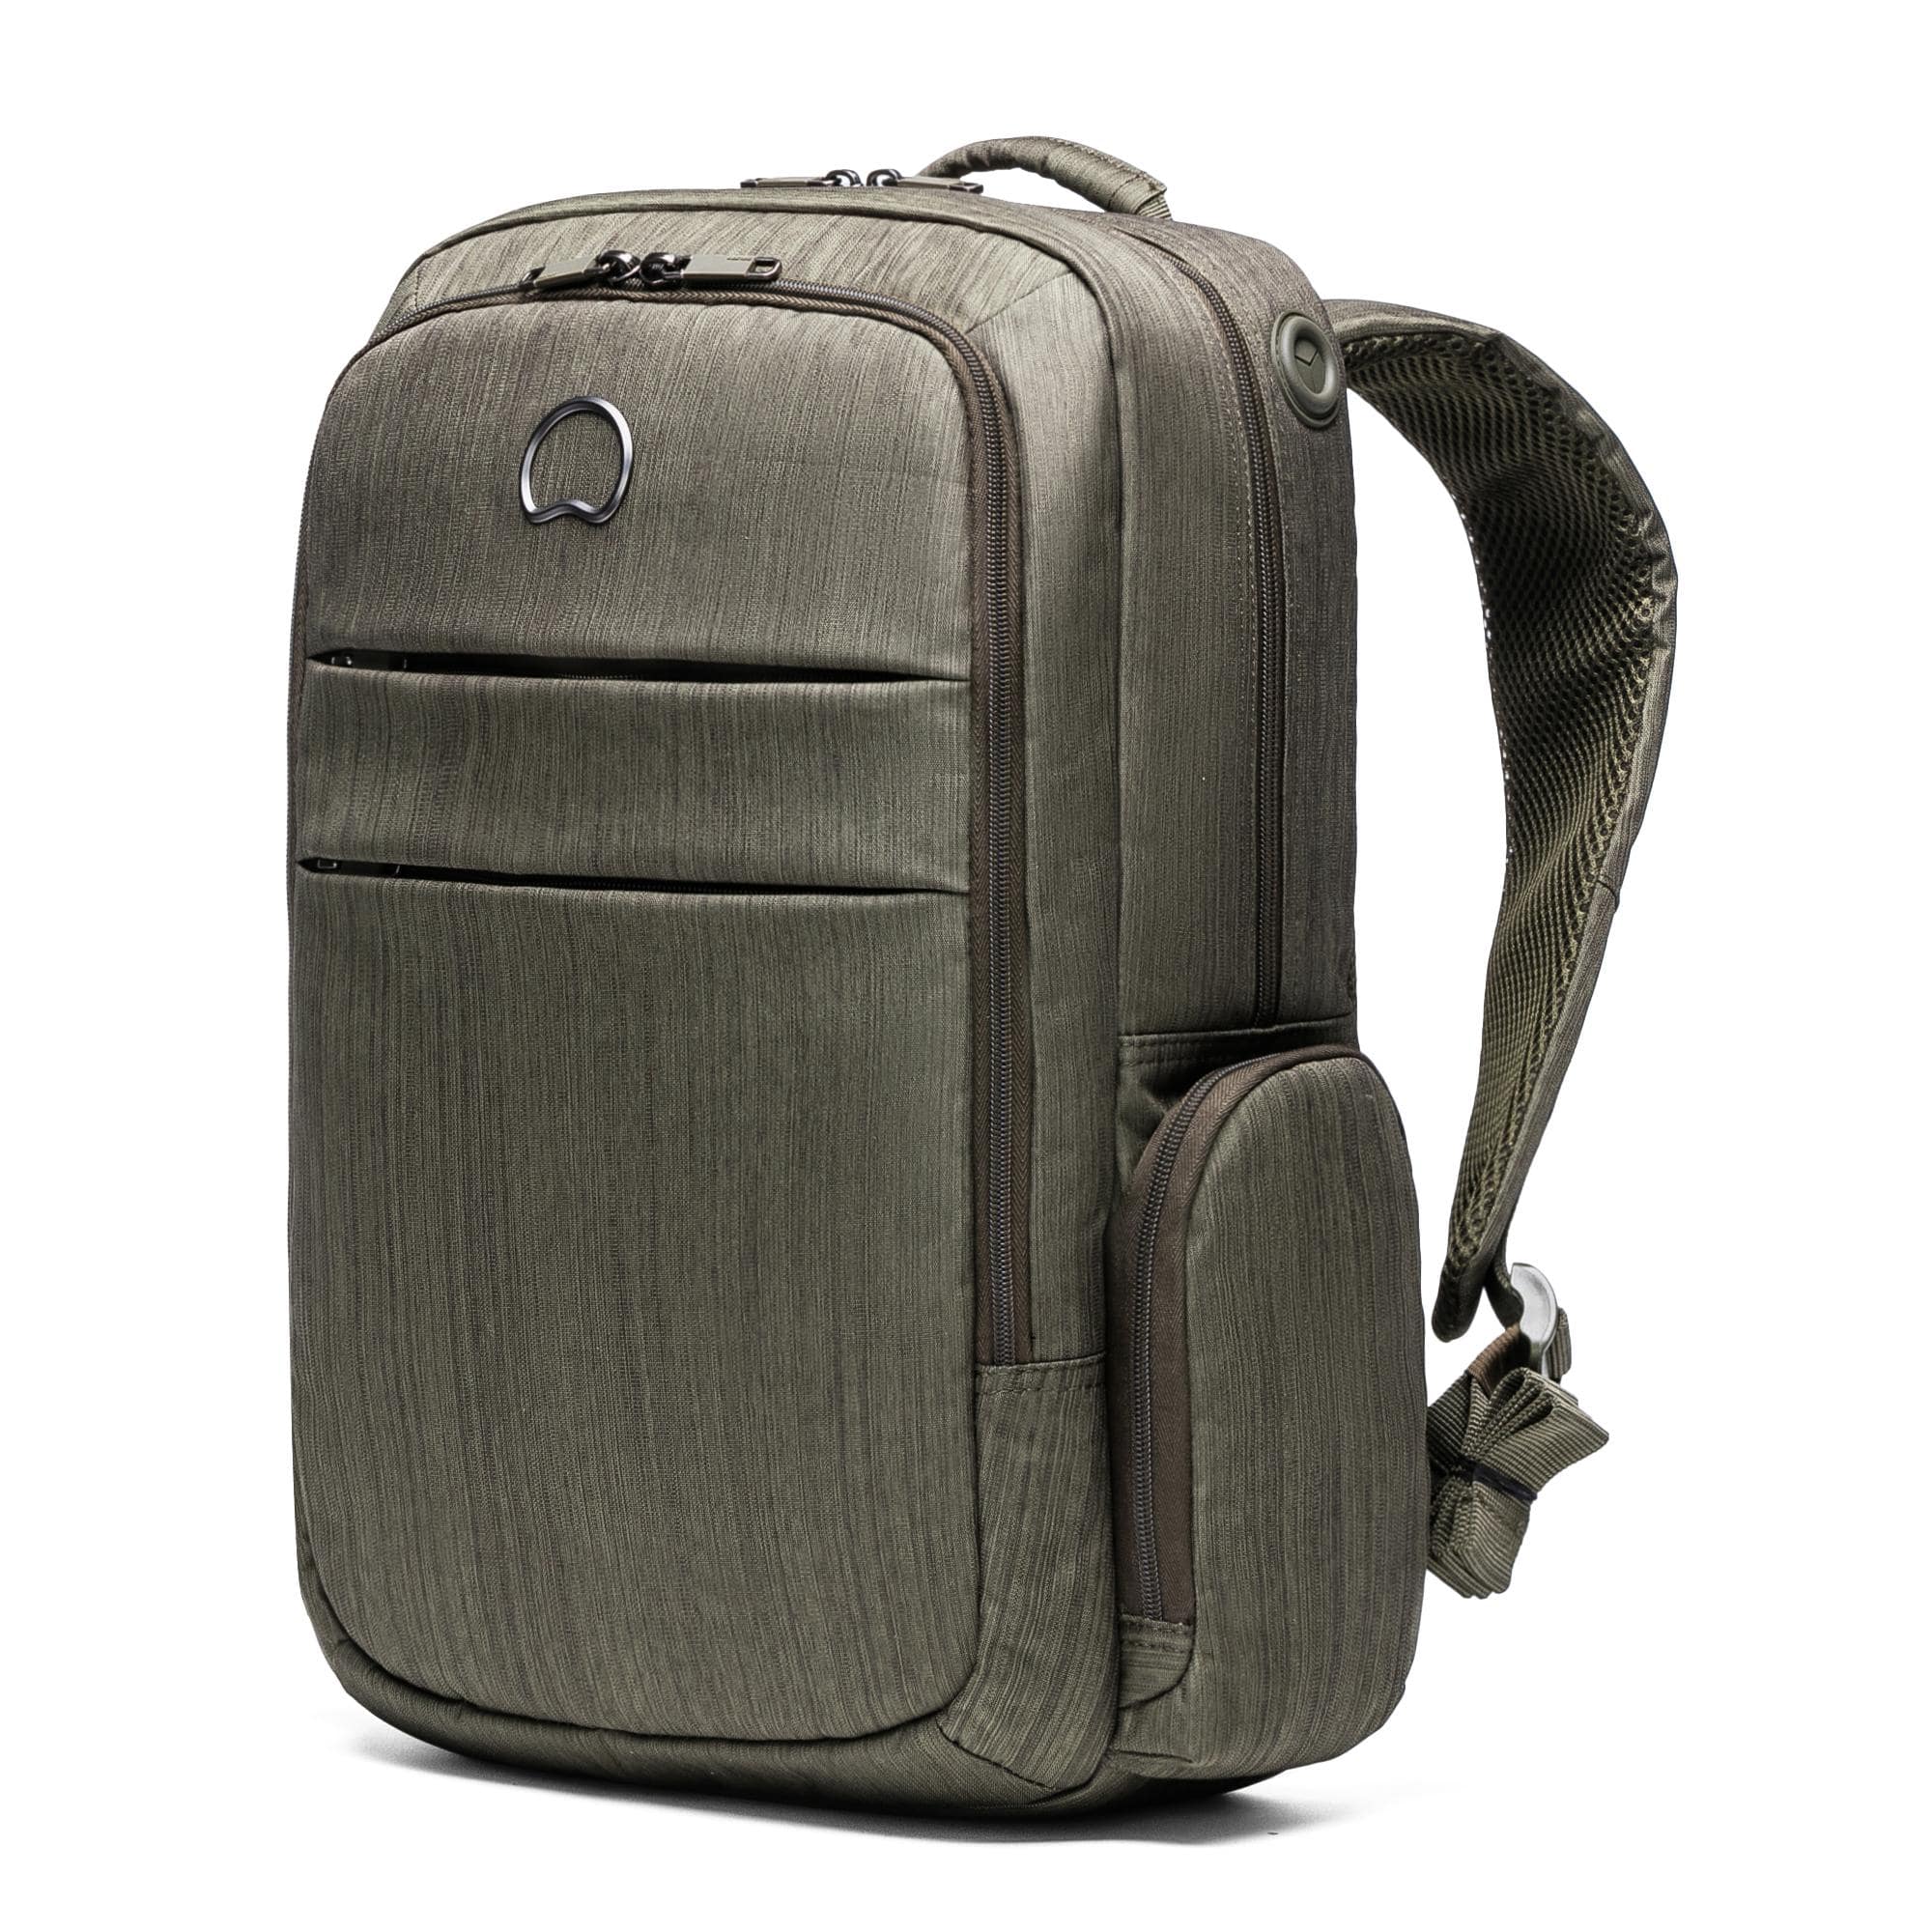 CLAIR 2 - Compartment Backpack